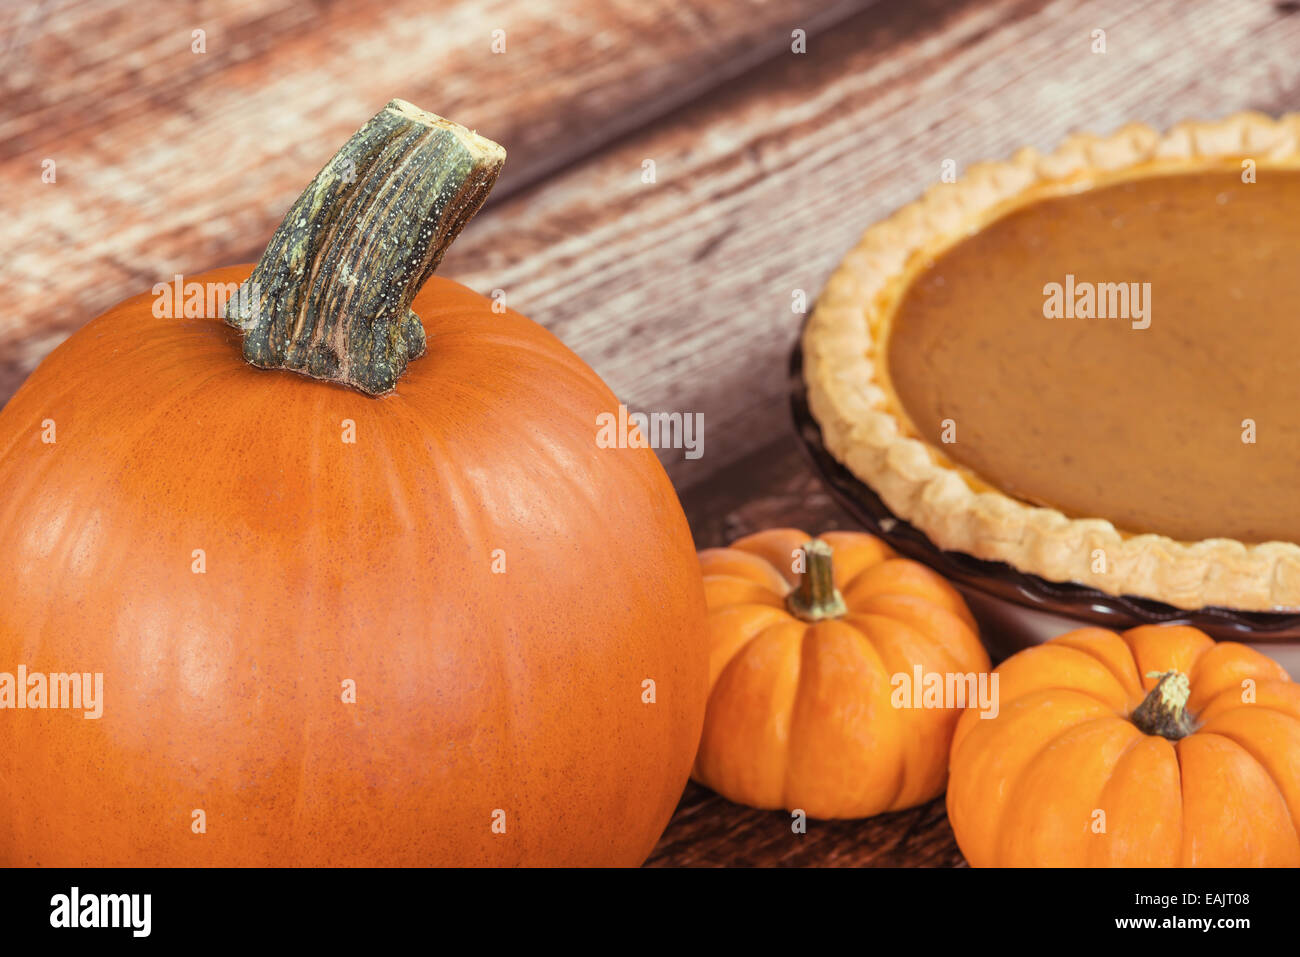 Closeup of pie pumpkin. Mini pumpkins and a pie on the background on wooden table Stock Photo